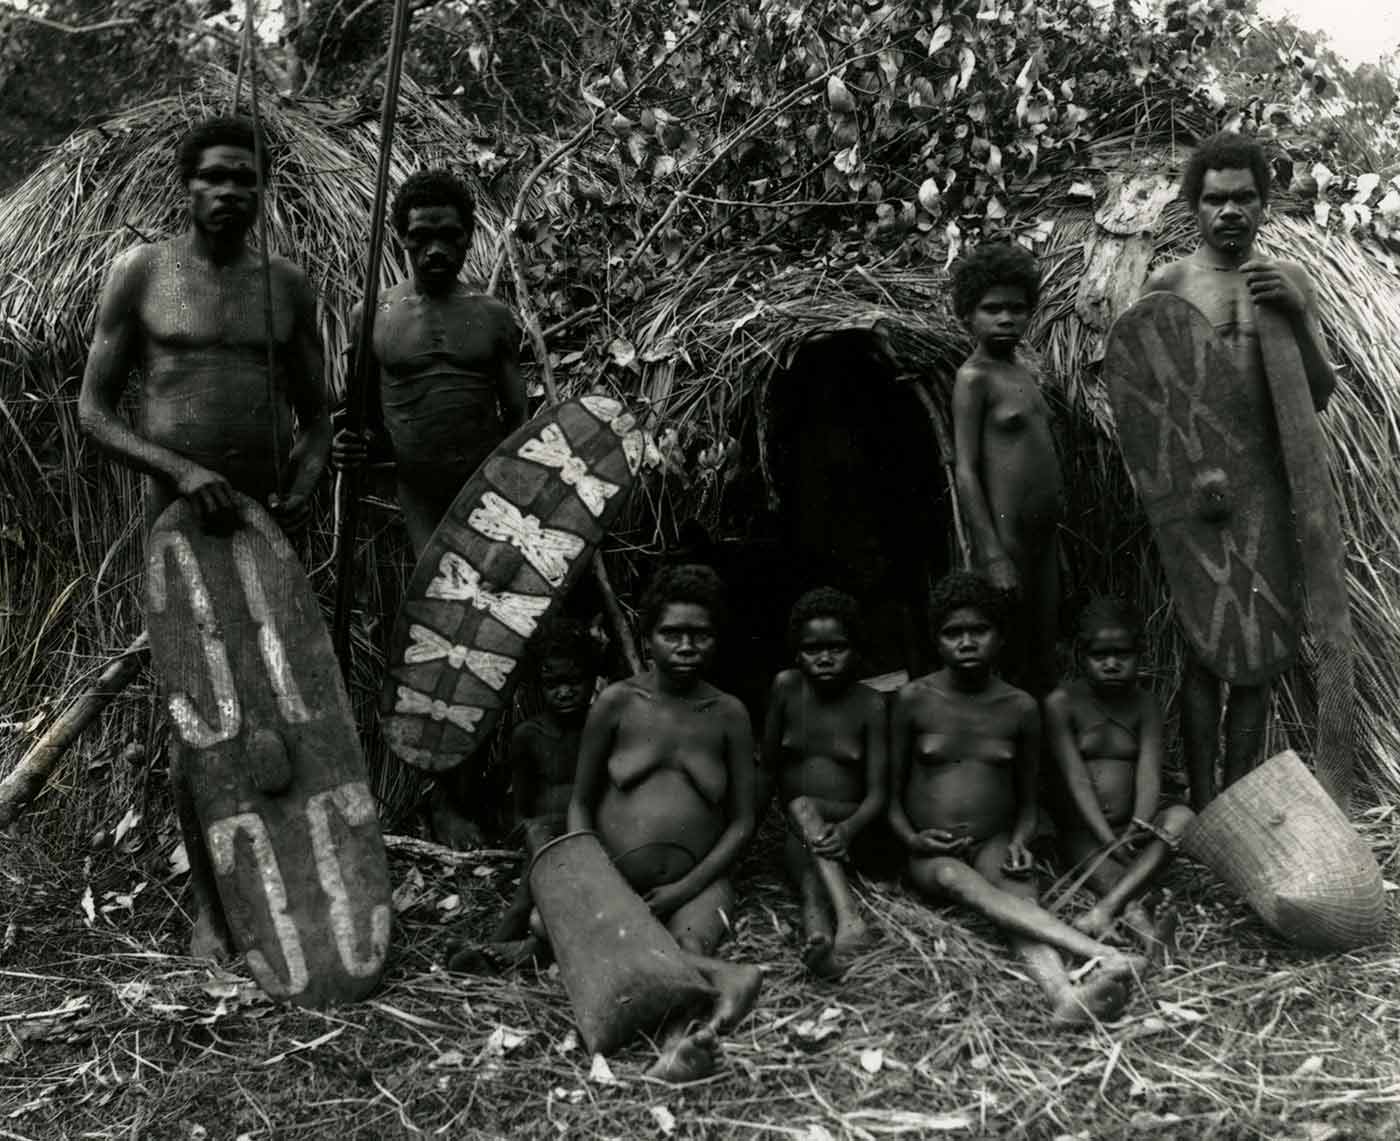 A historic black and white photo of Indigenous Australian adults and children with their shields and baskets.